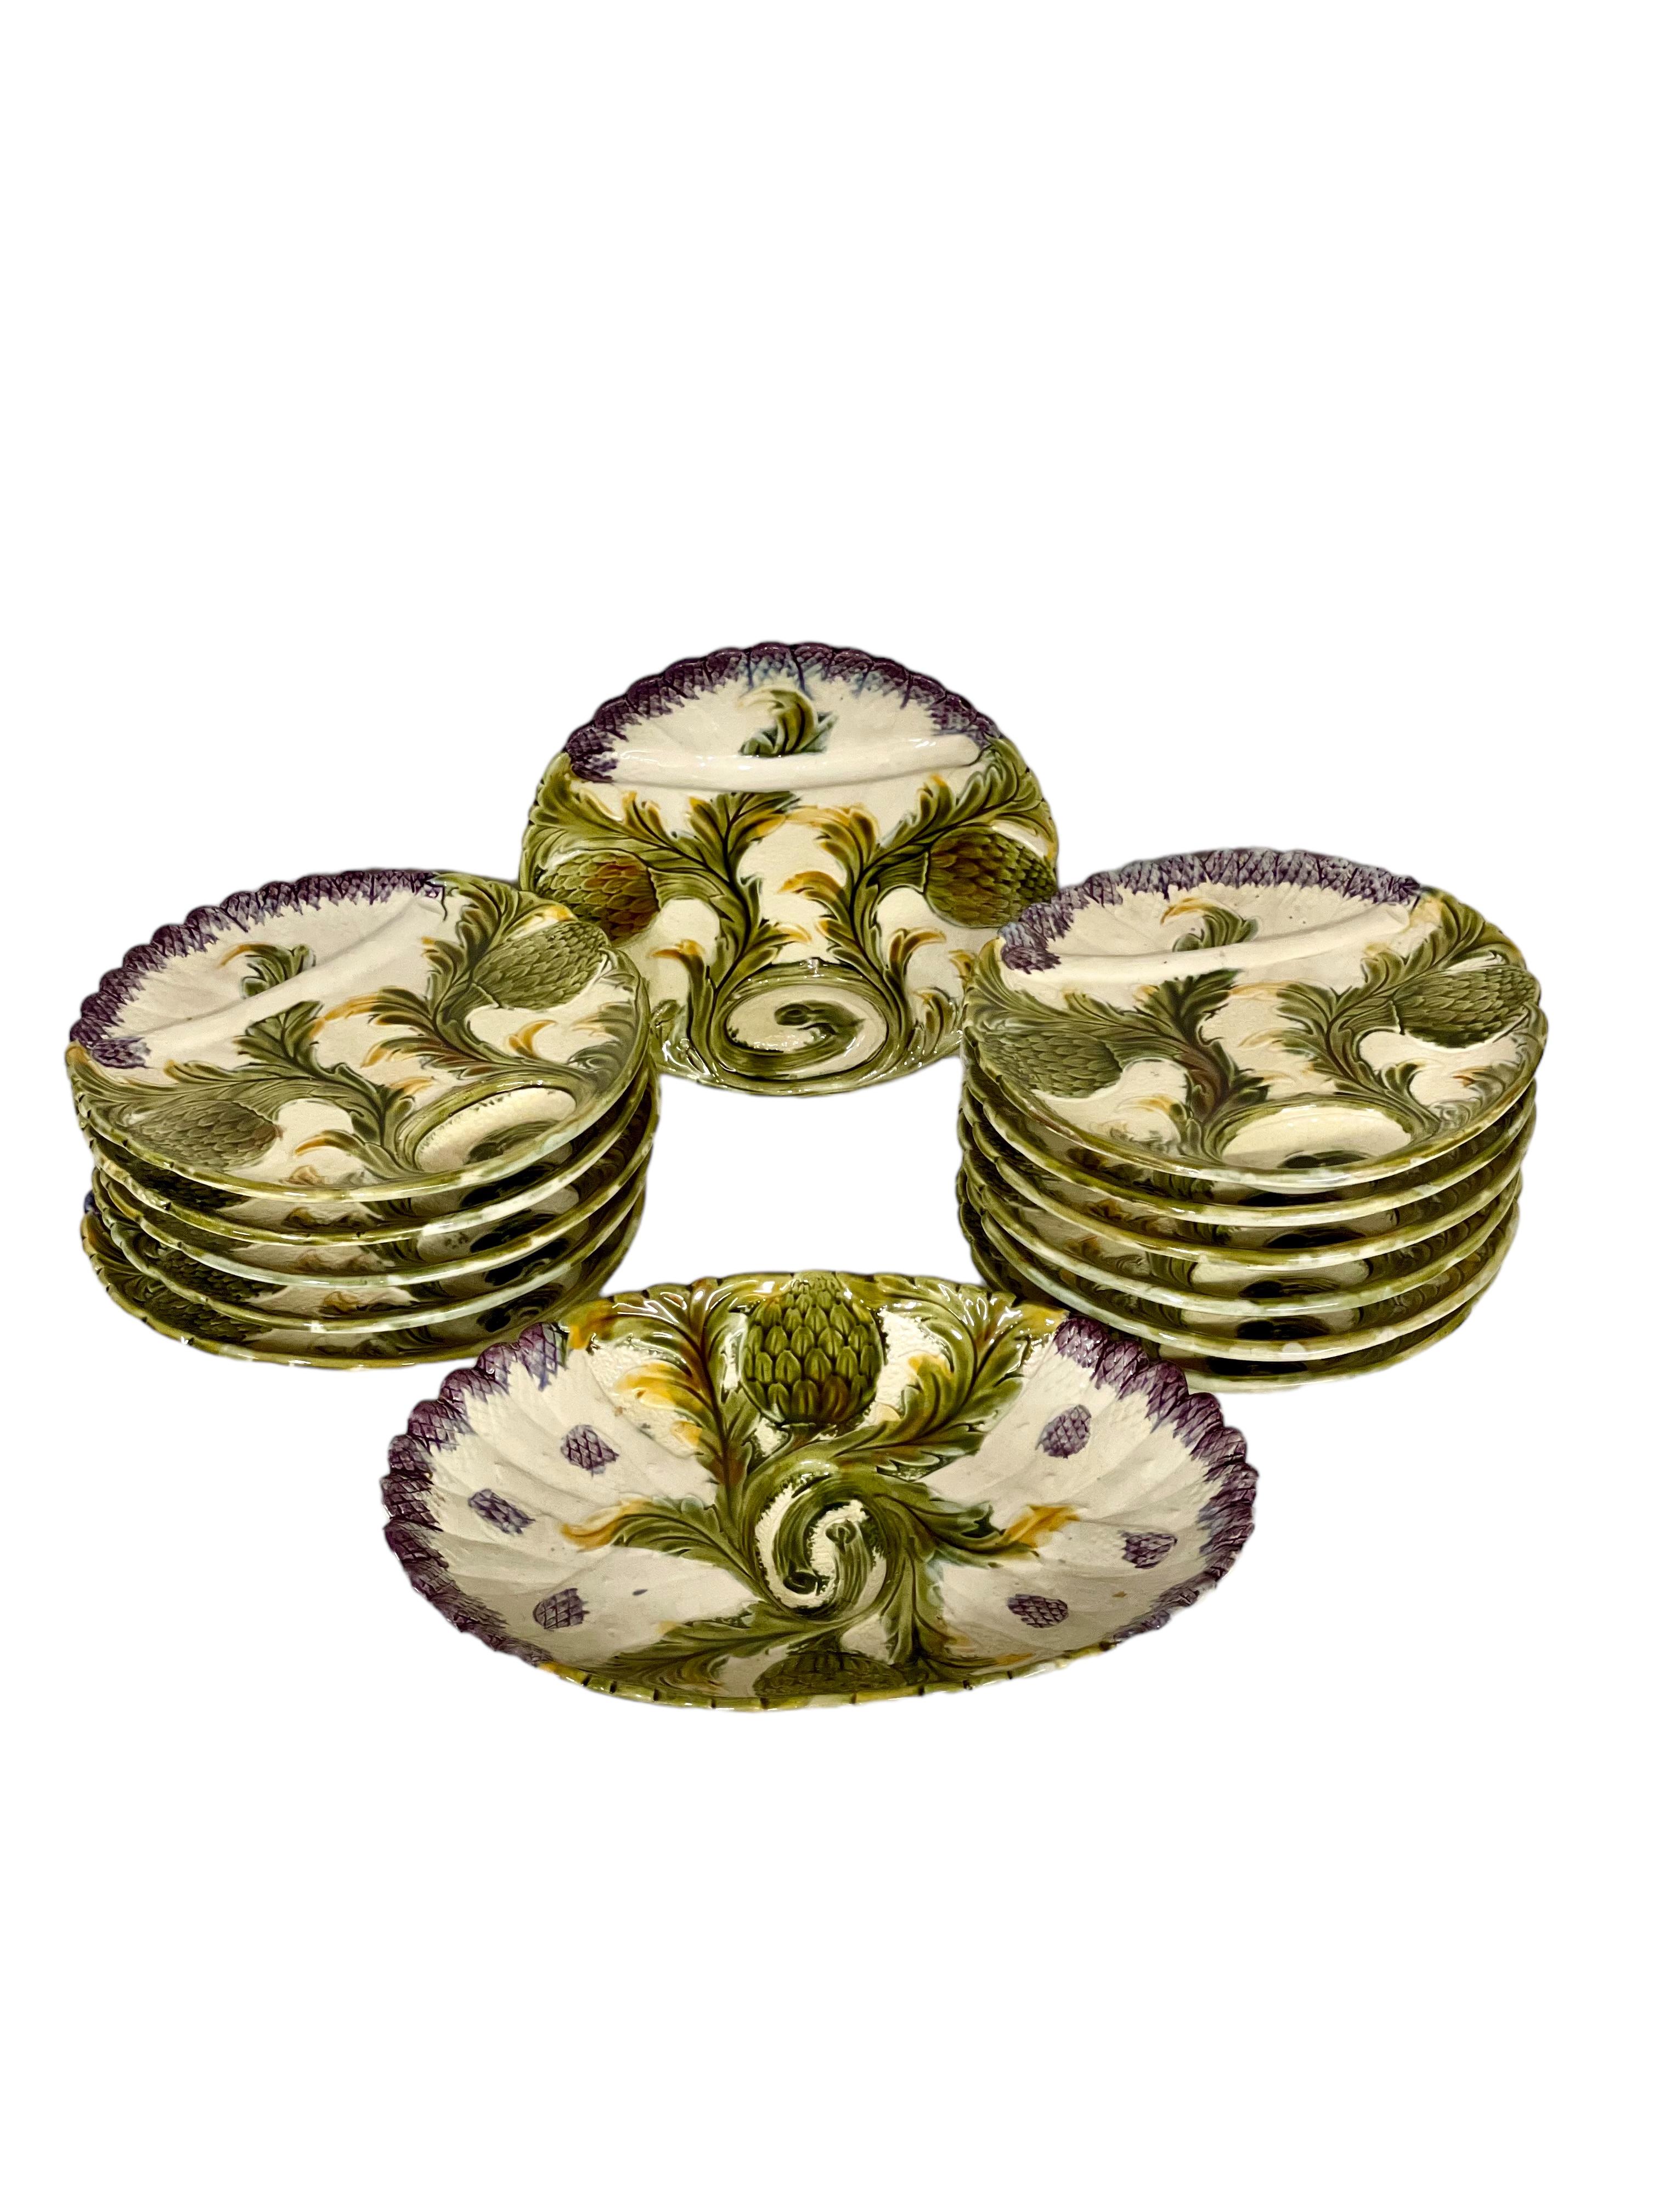 19th Century French Oval Shaped Majolica Asparagus Serving Platter For Sale 5